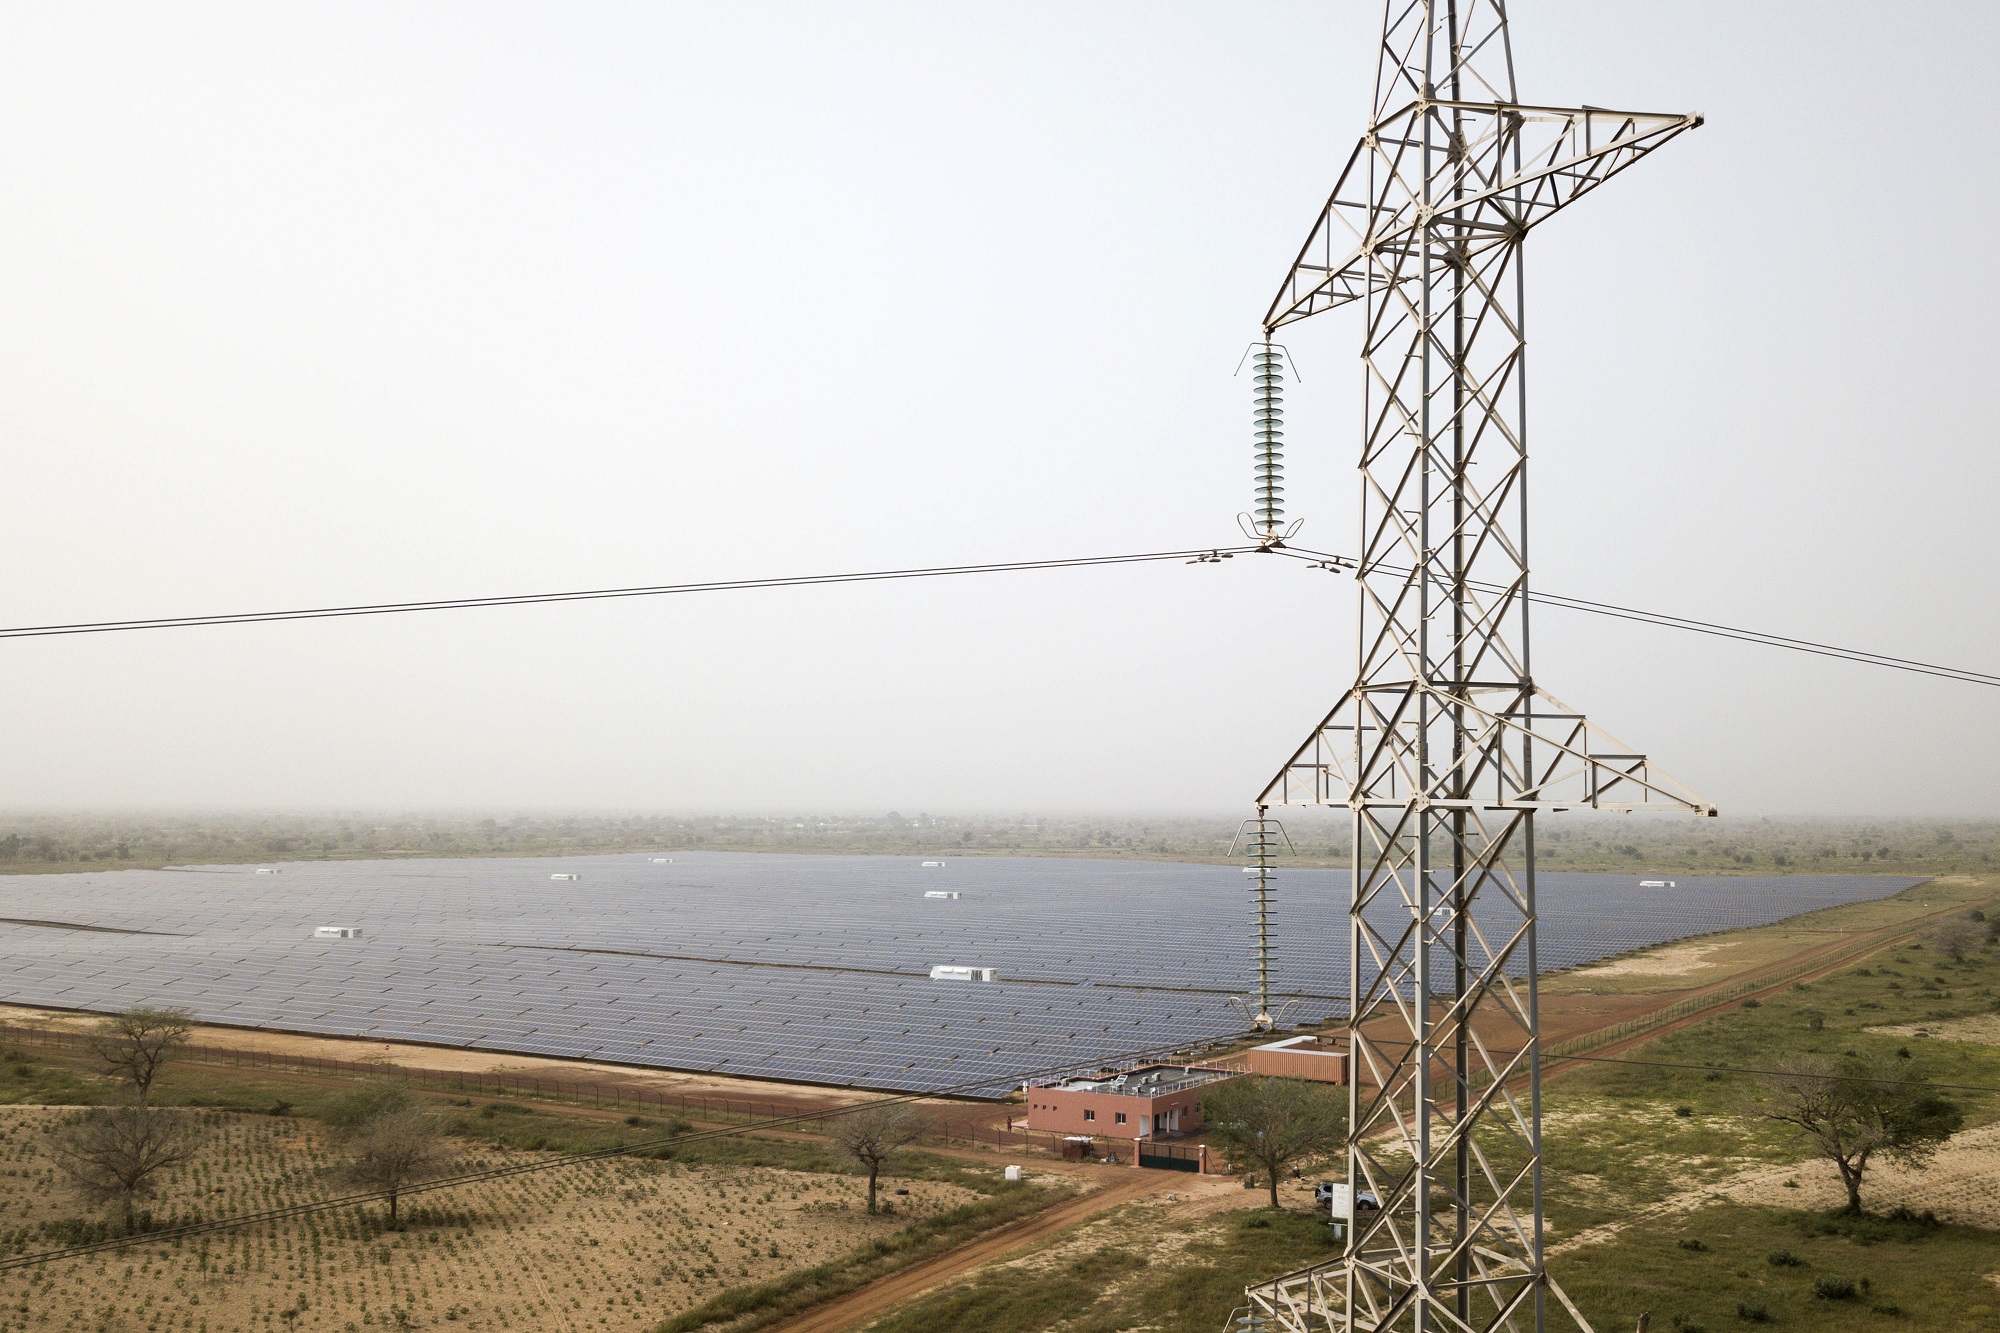 PRICE AND NEED FOR RELIABLE ELECTRICITY POWER ARE SPURRING SOLAR SALES TO AFRICAN BUSINESSES